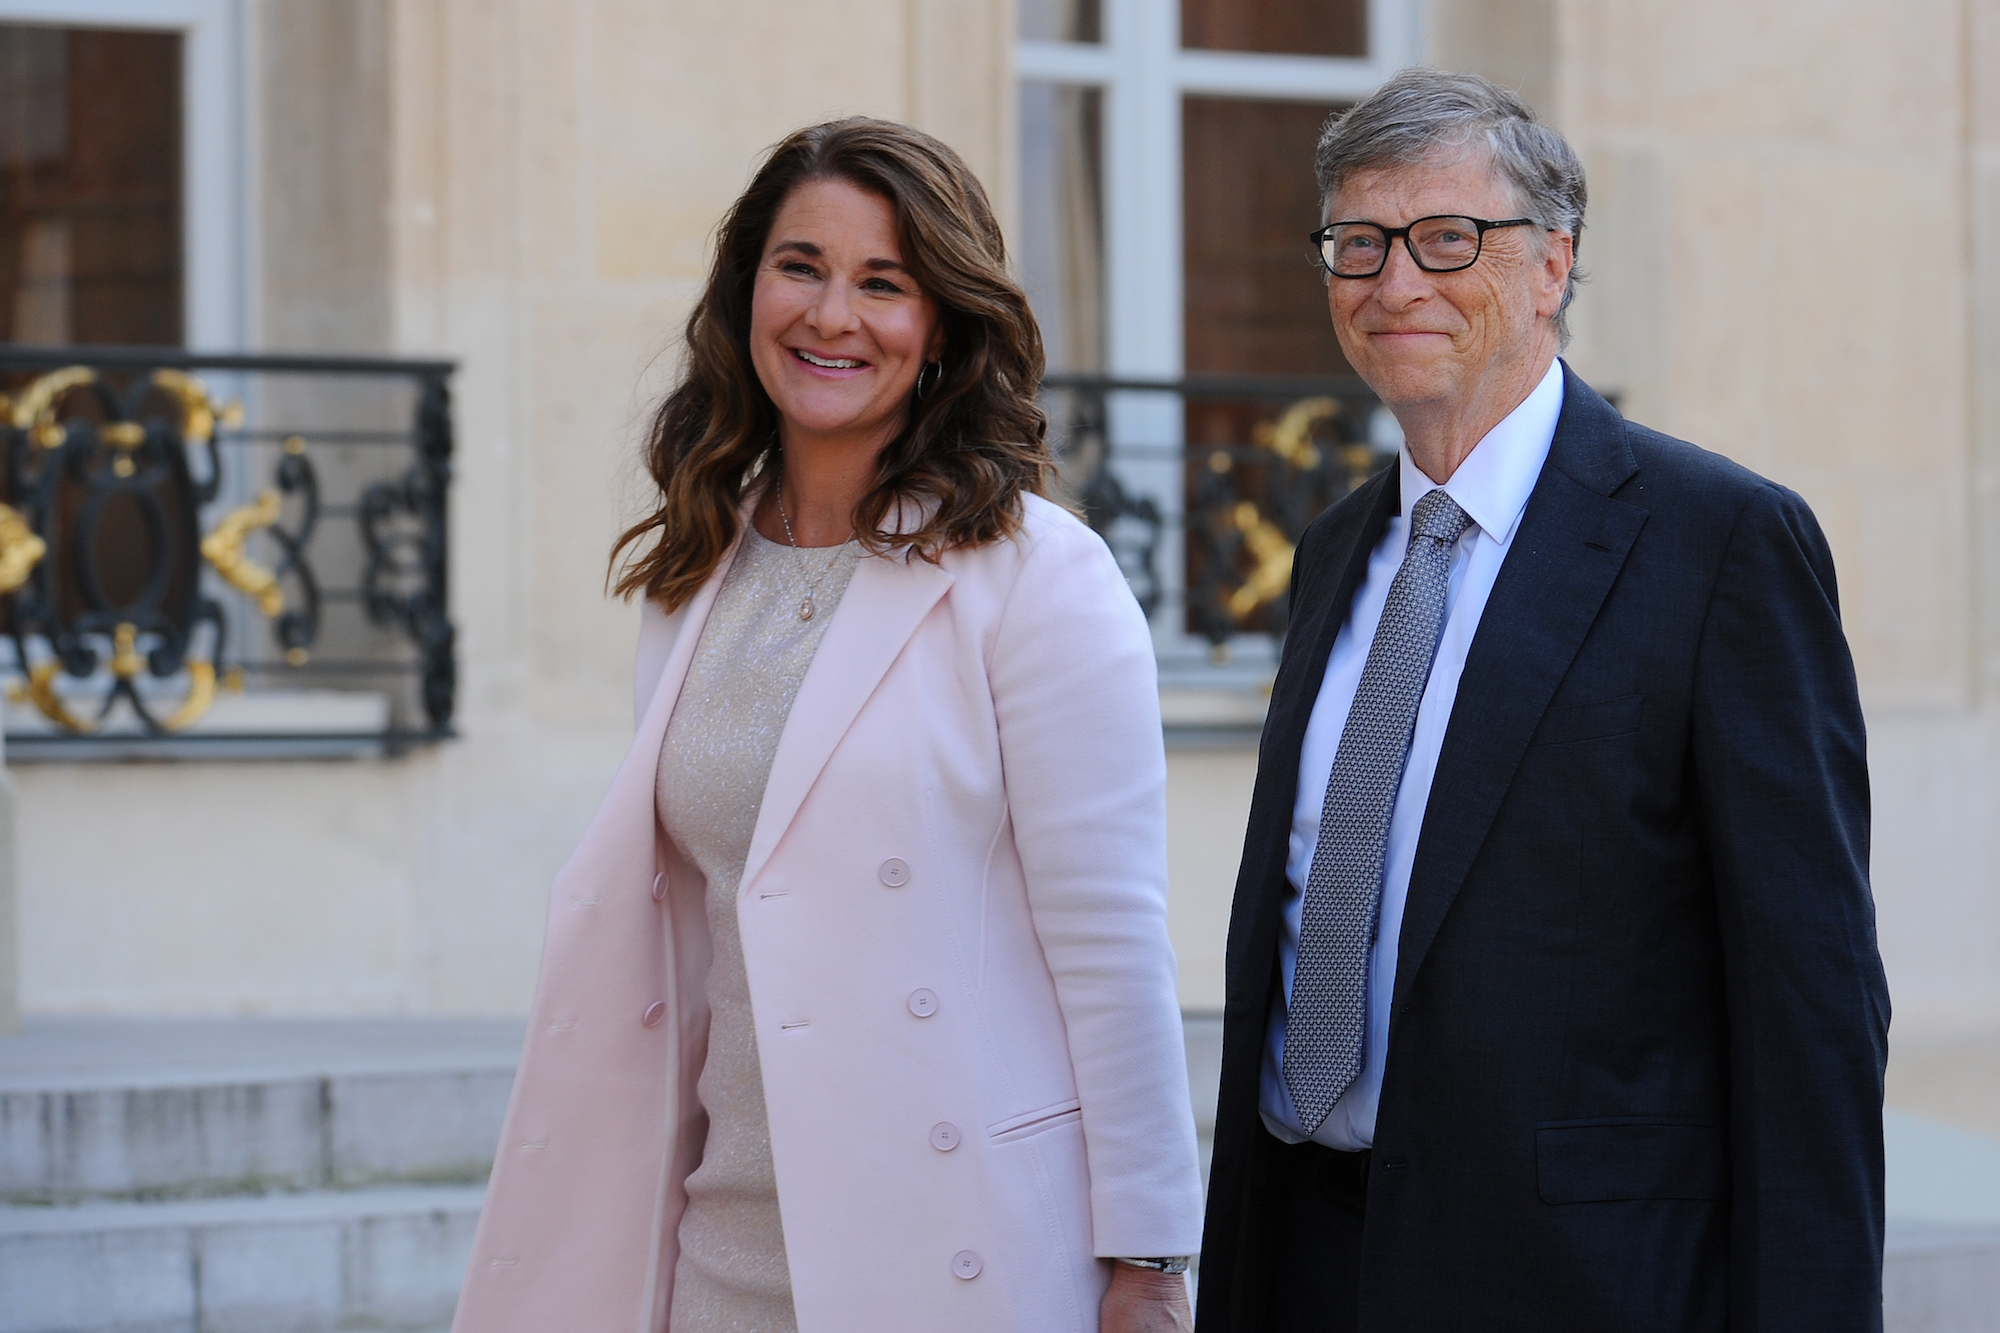 Facebook and The Gates Foundation are matching $2M in donations for #GivingTuesday